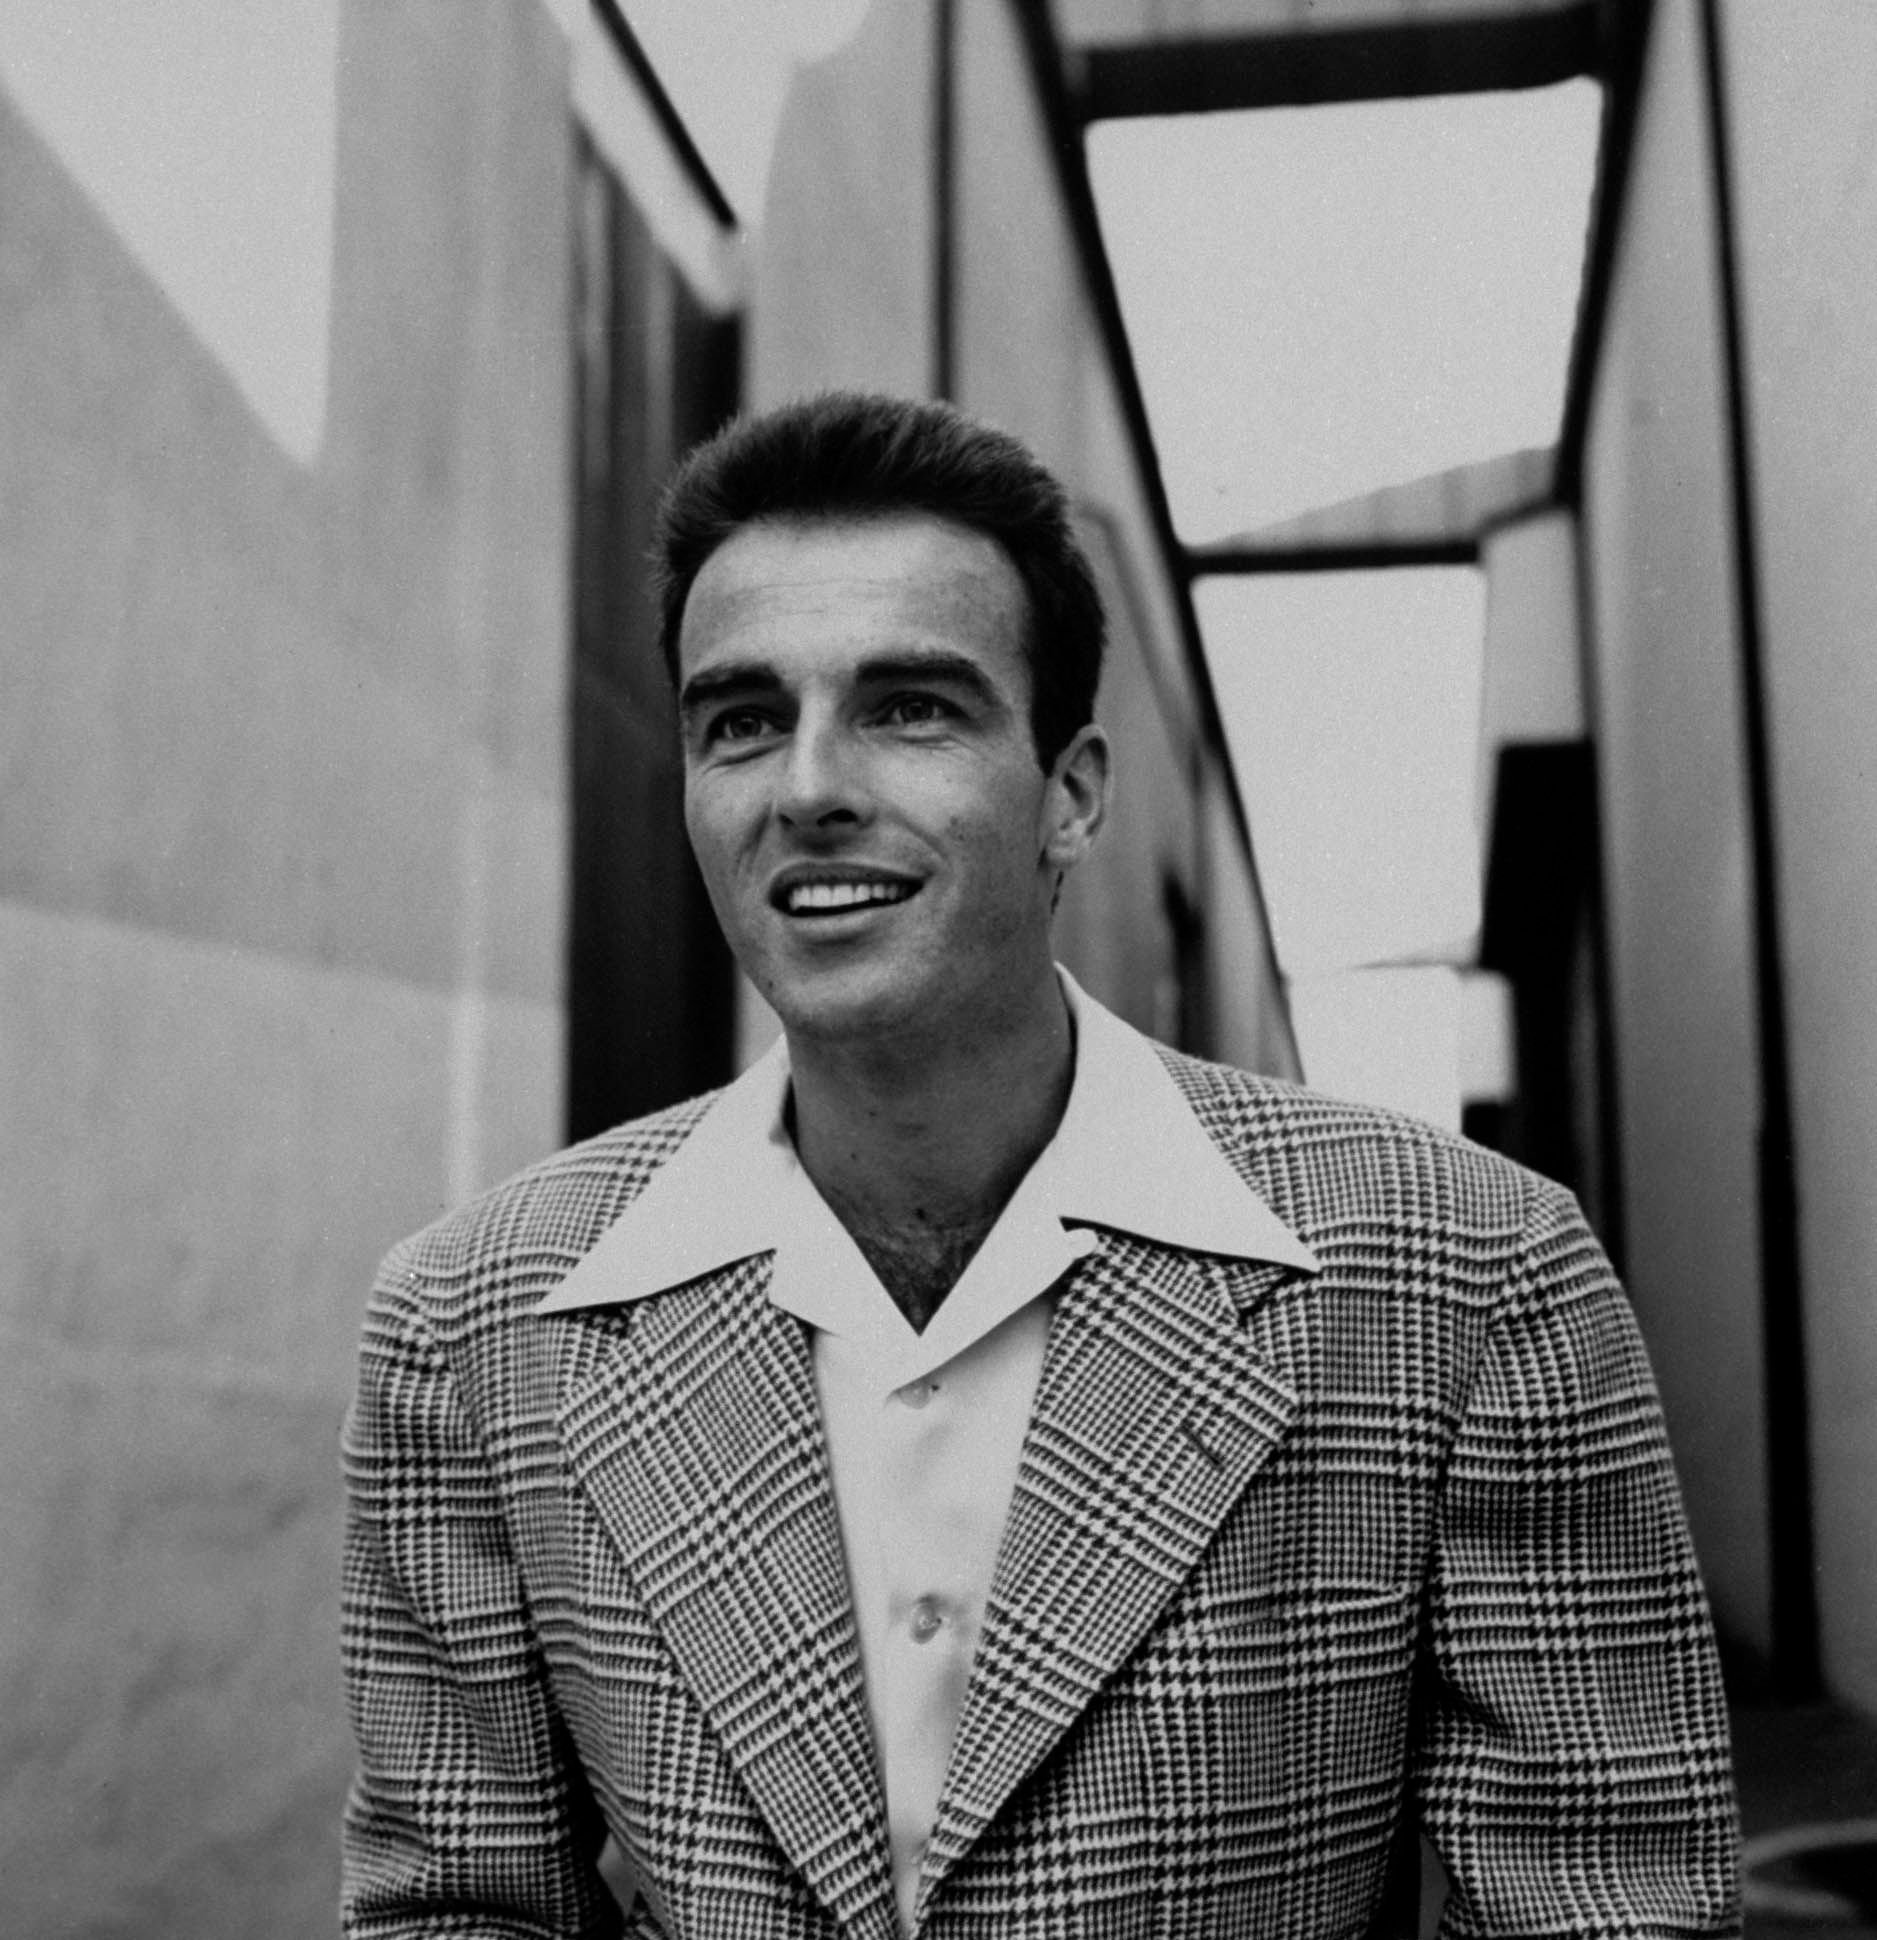 Montgomery Clift at Paramount Studios during time of filming "A Place in the Sun" | Photo: Peter Stackpole/The LIFE Picture Collection via Getty Images